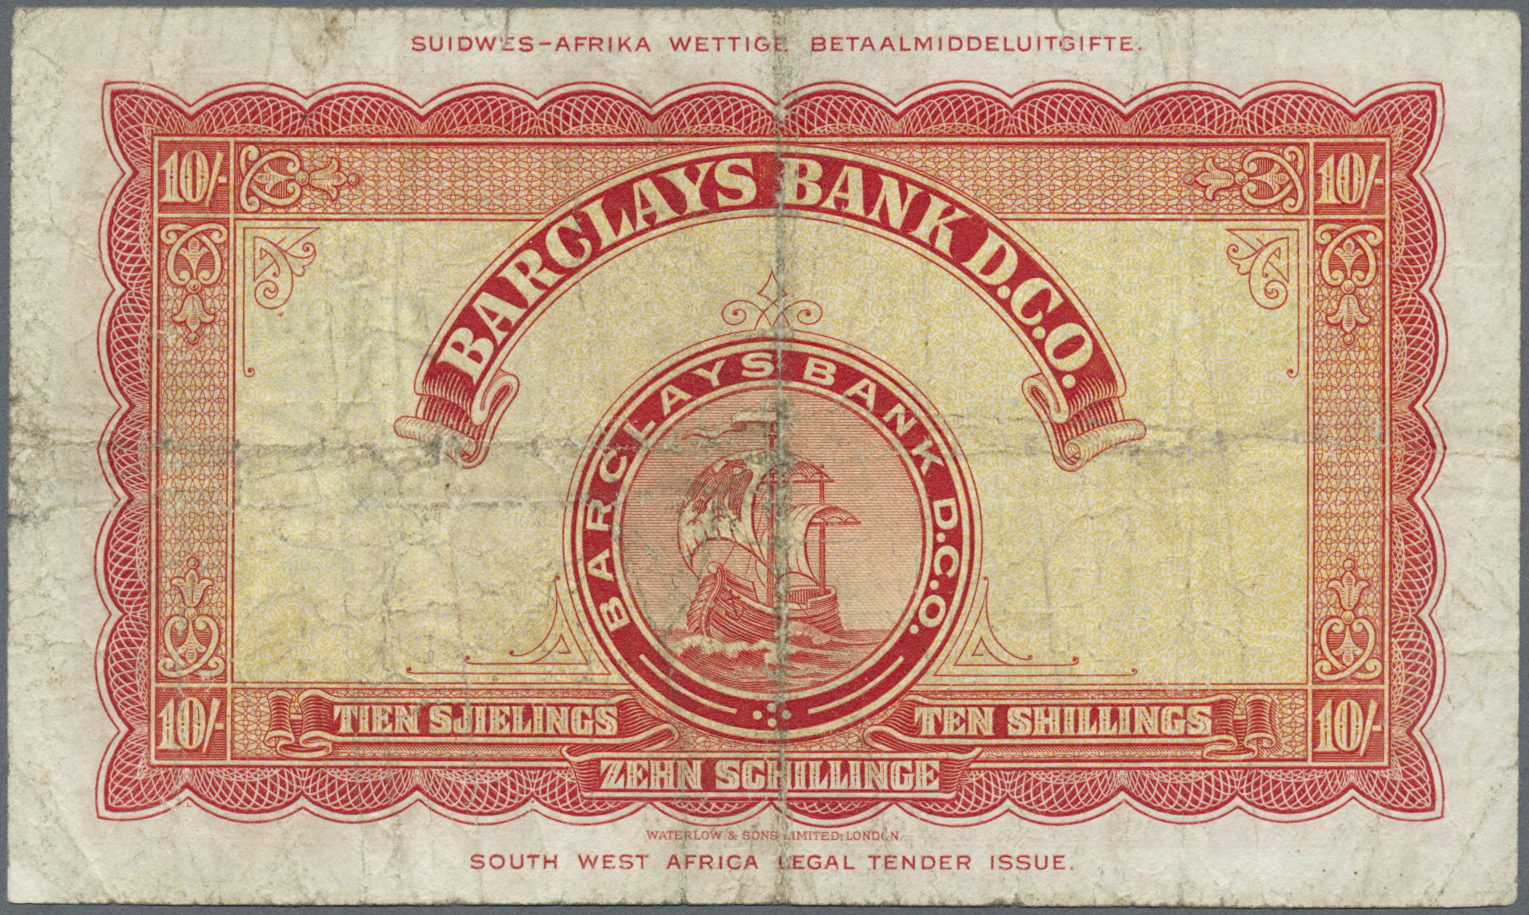 02977 Southwest Africa: 10 Shillings 1954 P. 4a, Stonger Folds In Paper, A Minor Split At Right Border, Stain In Paper, - Namibie